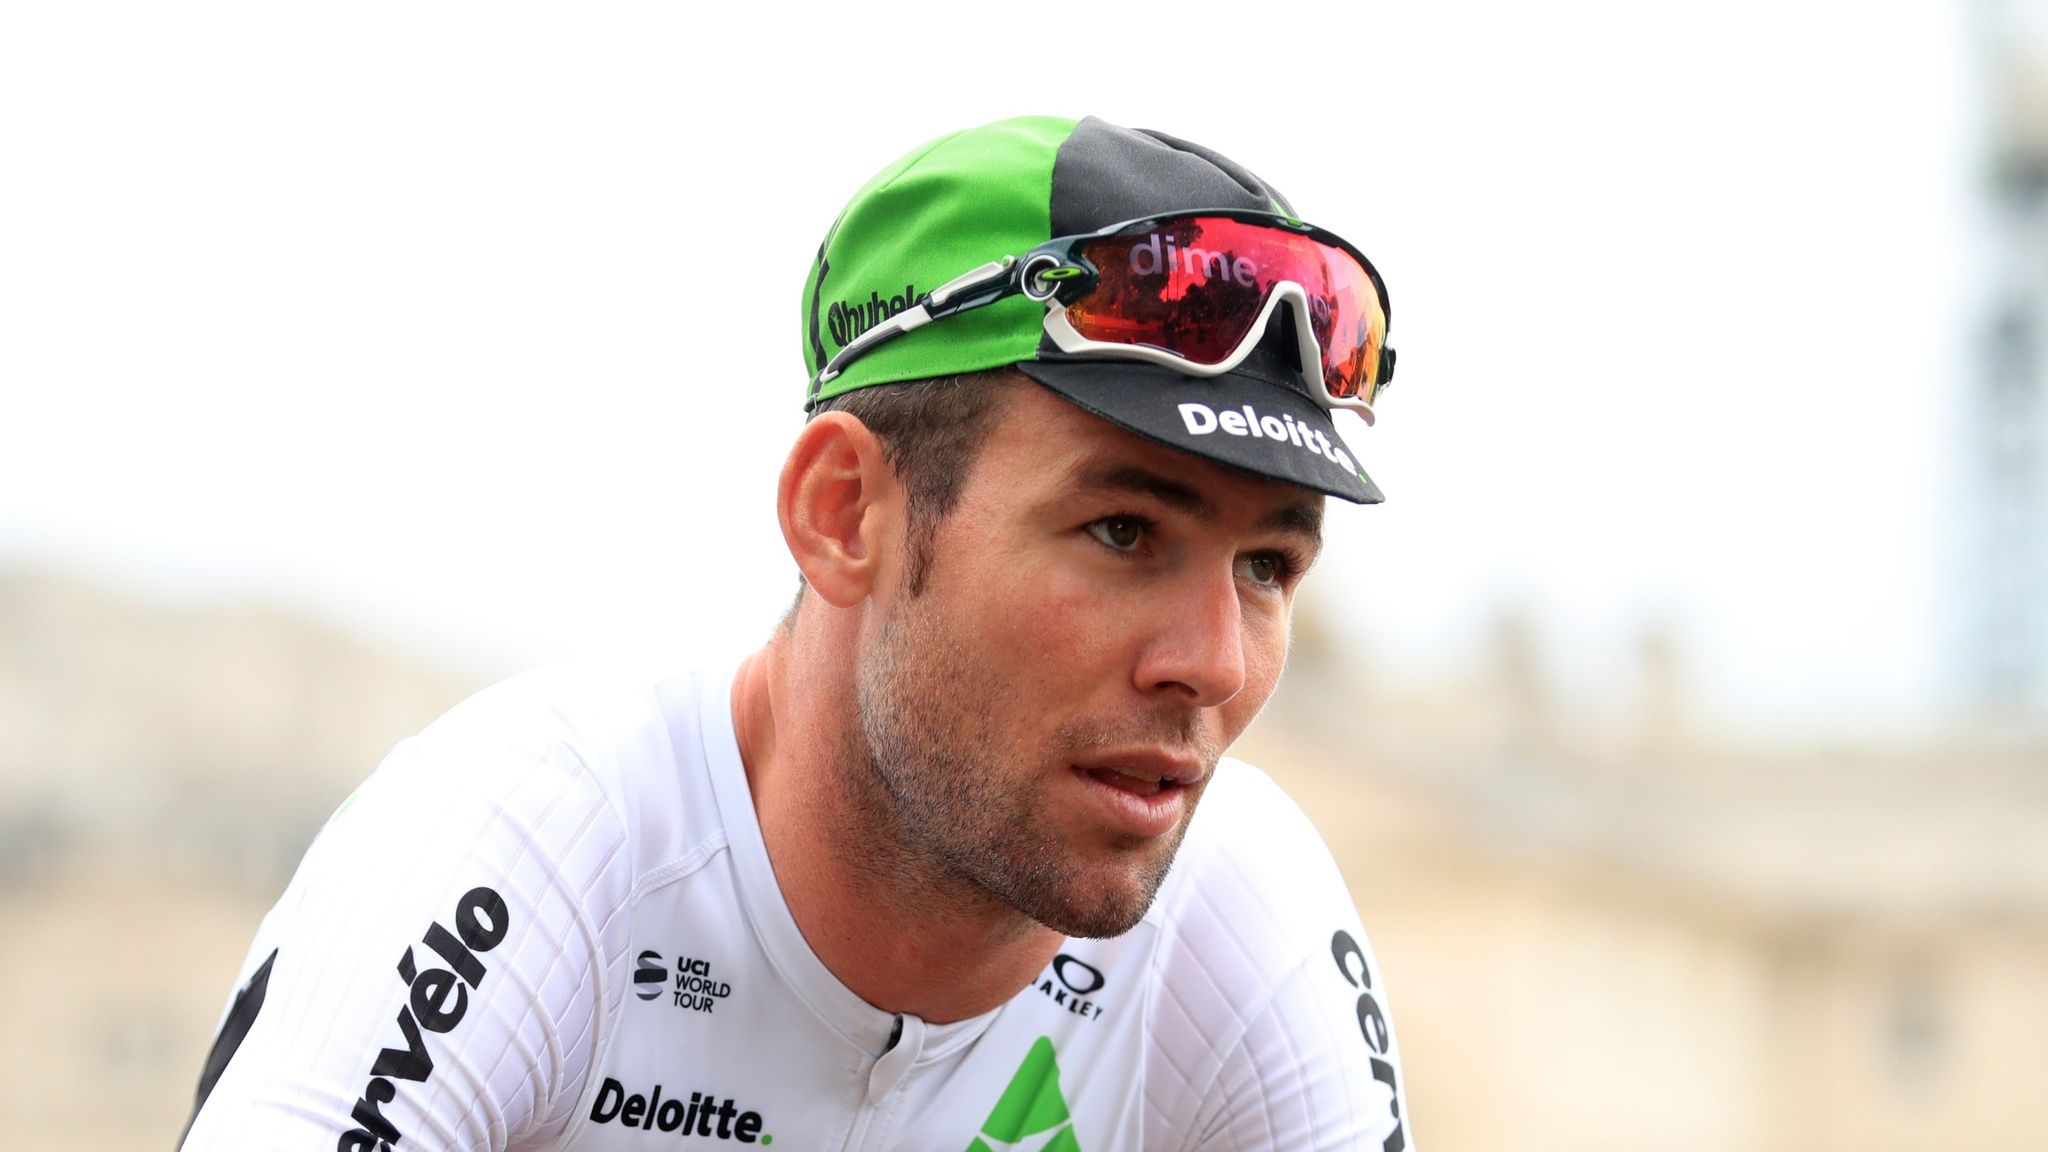 Mark Cavendish to take indefinite break from cycling due to illness